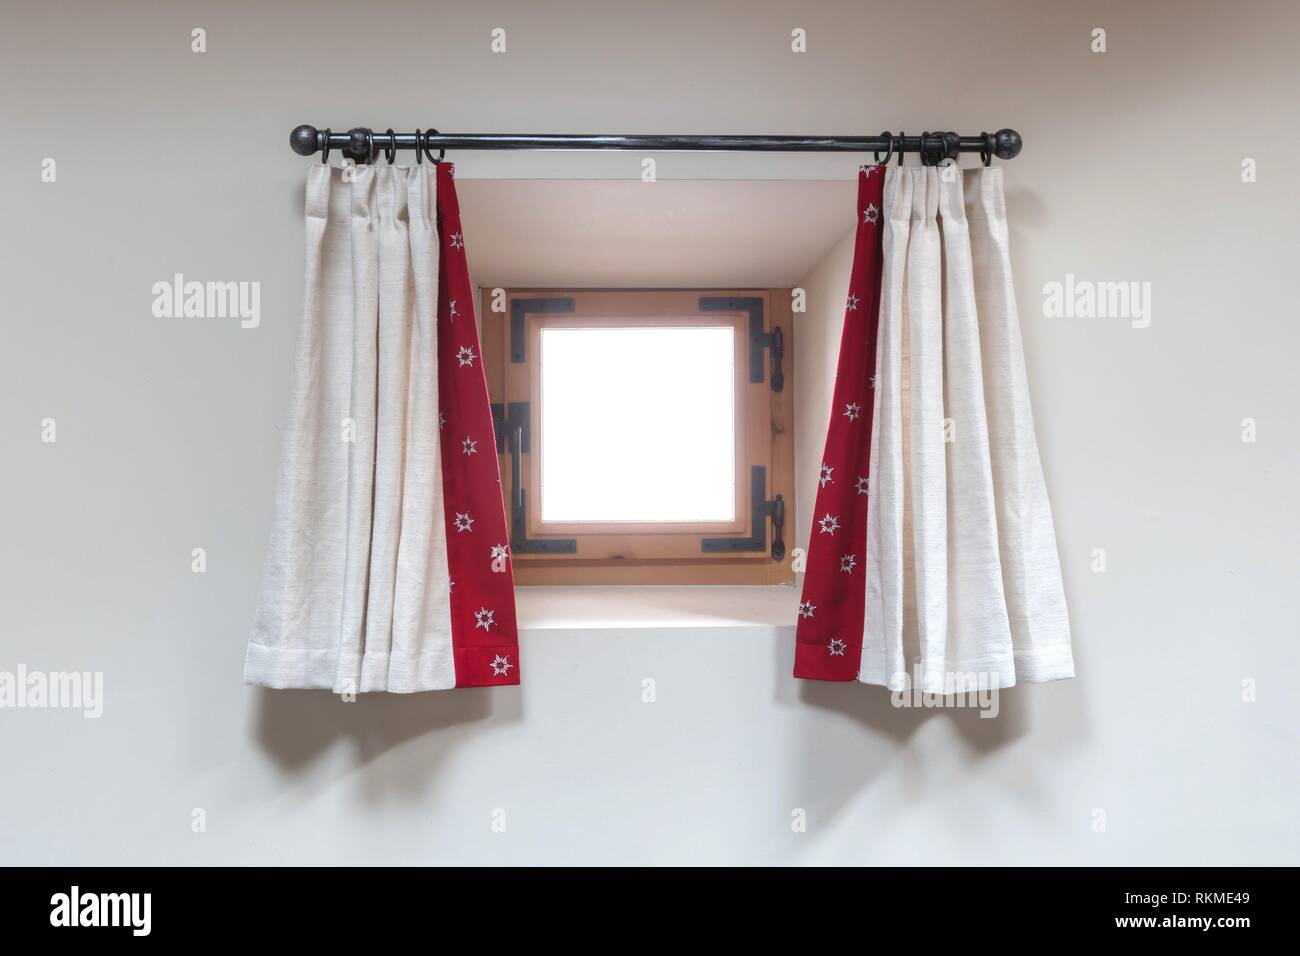 House interior - A small window with curtains - Alps Stock Photo - Alamy